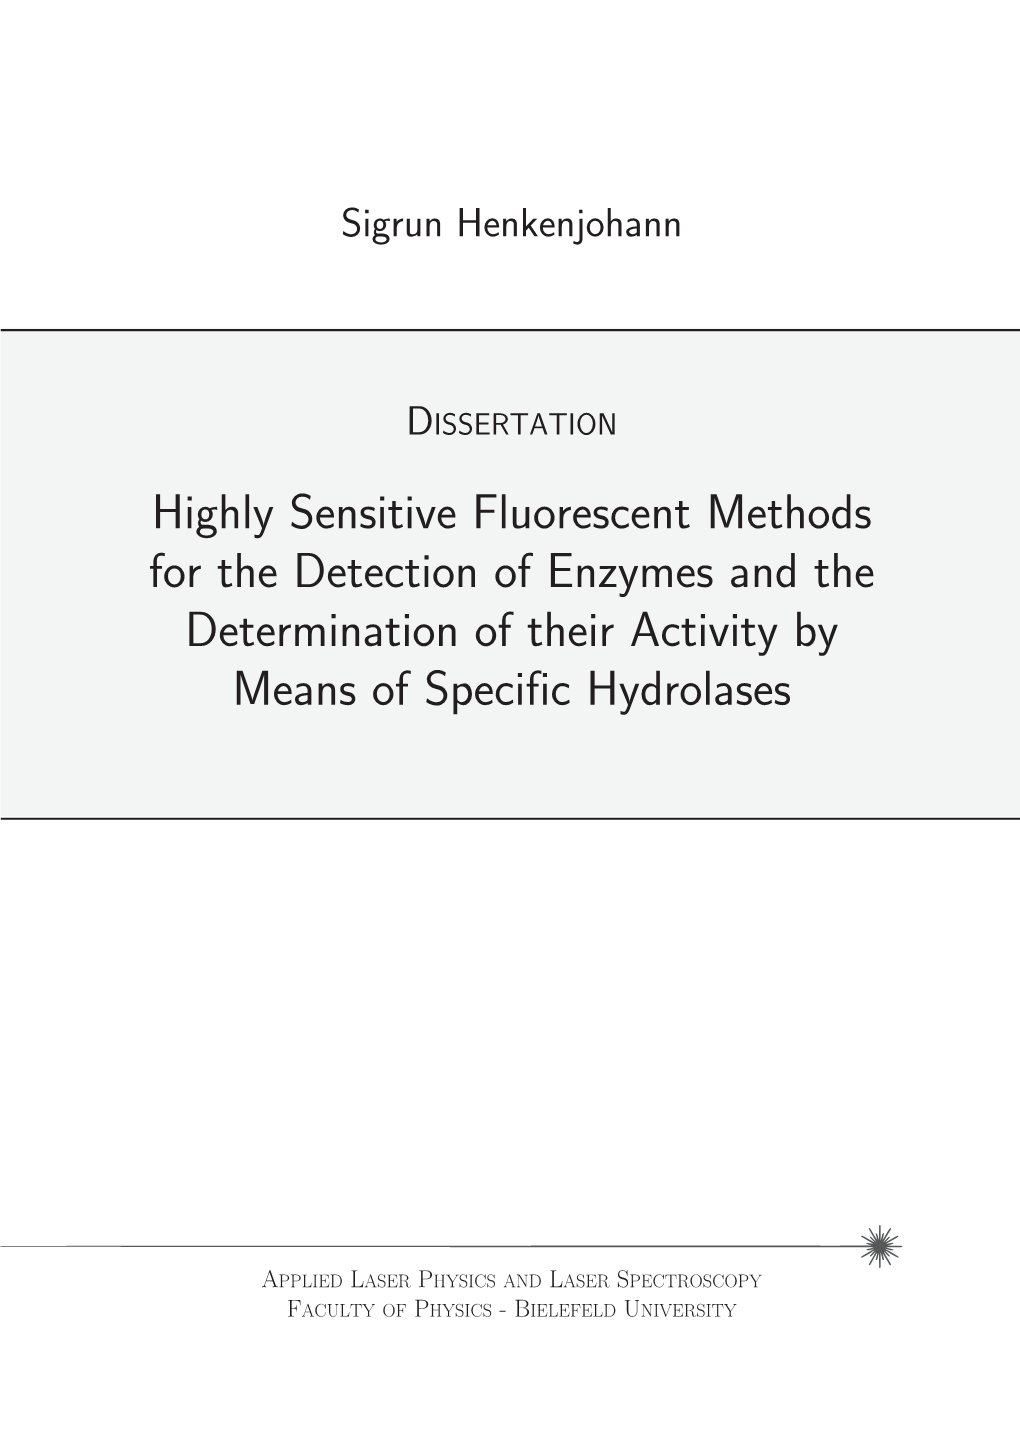 Highly Sensitive Fluorescent Methods for the Detection of Enzymes and the Determination of Their Activity by Means of Specific Hydrolases